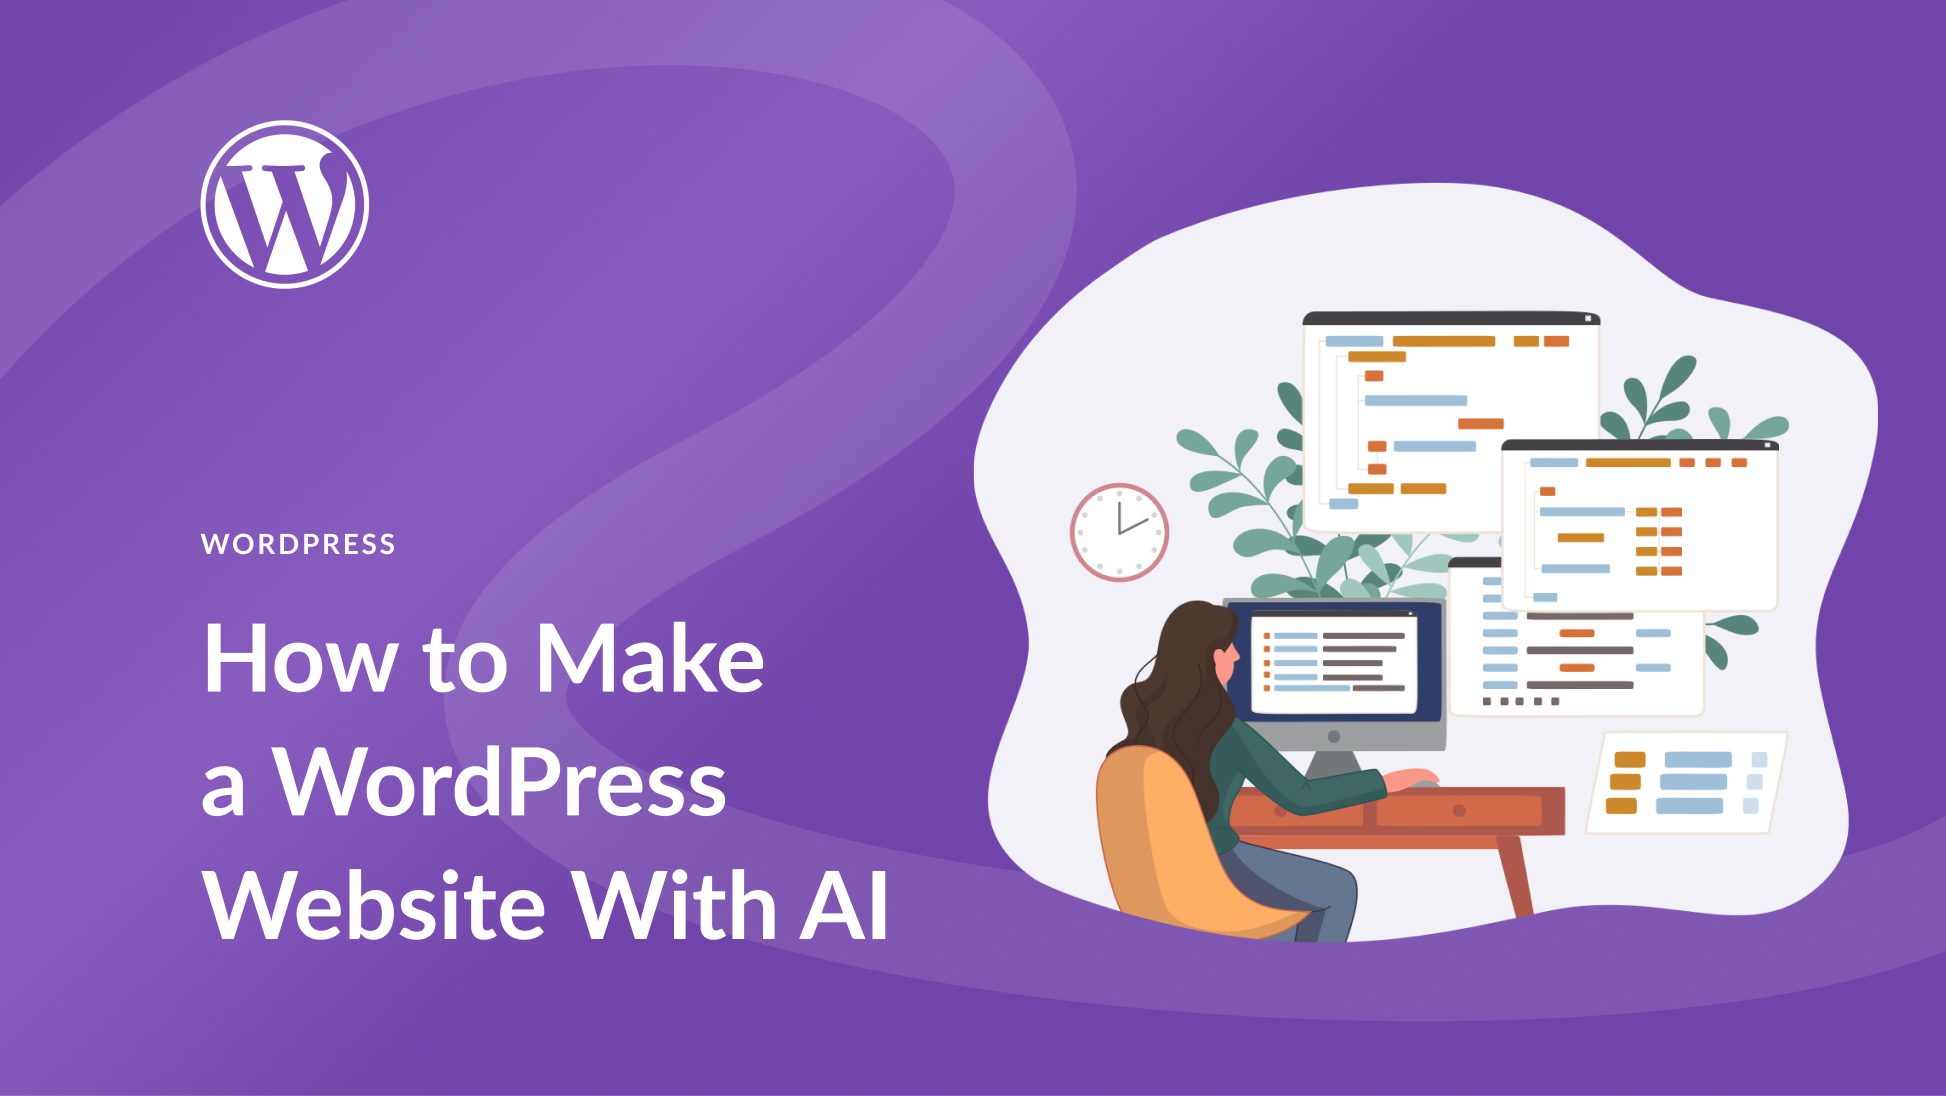 How to Make a WordPress Website With AI